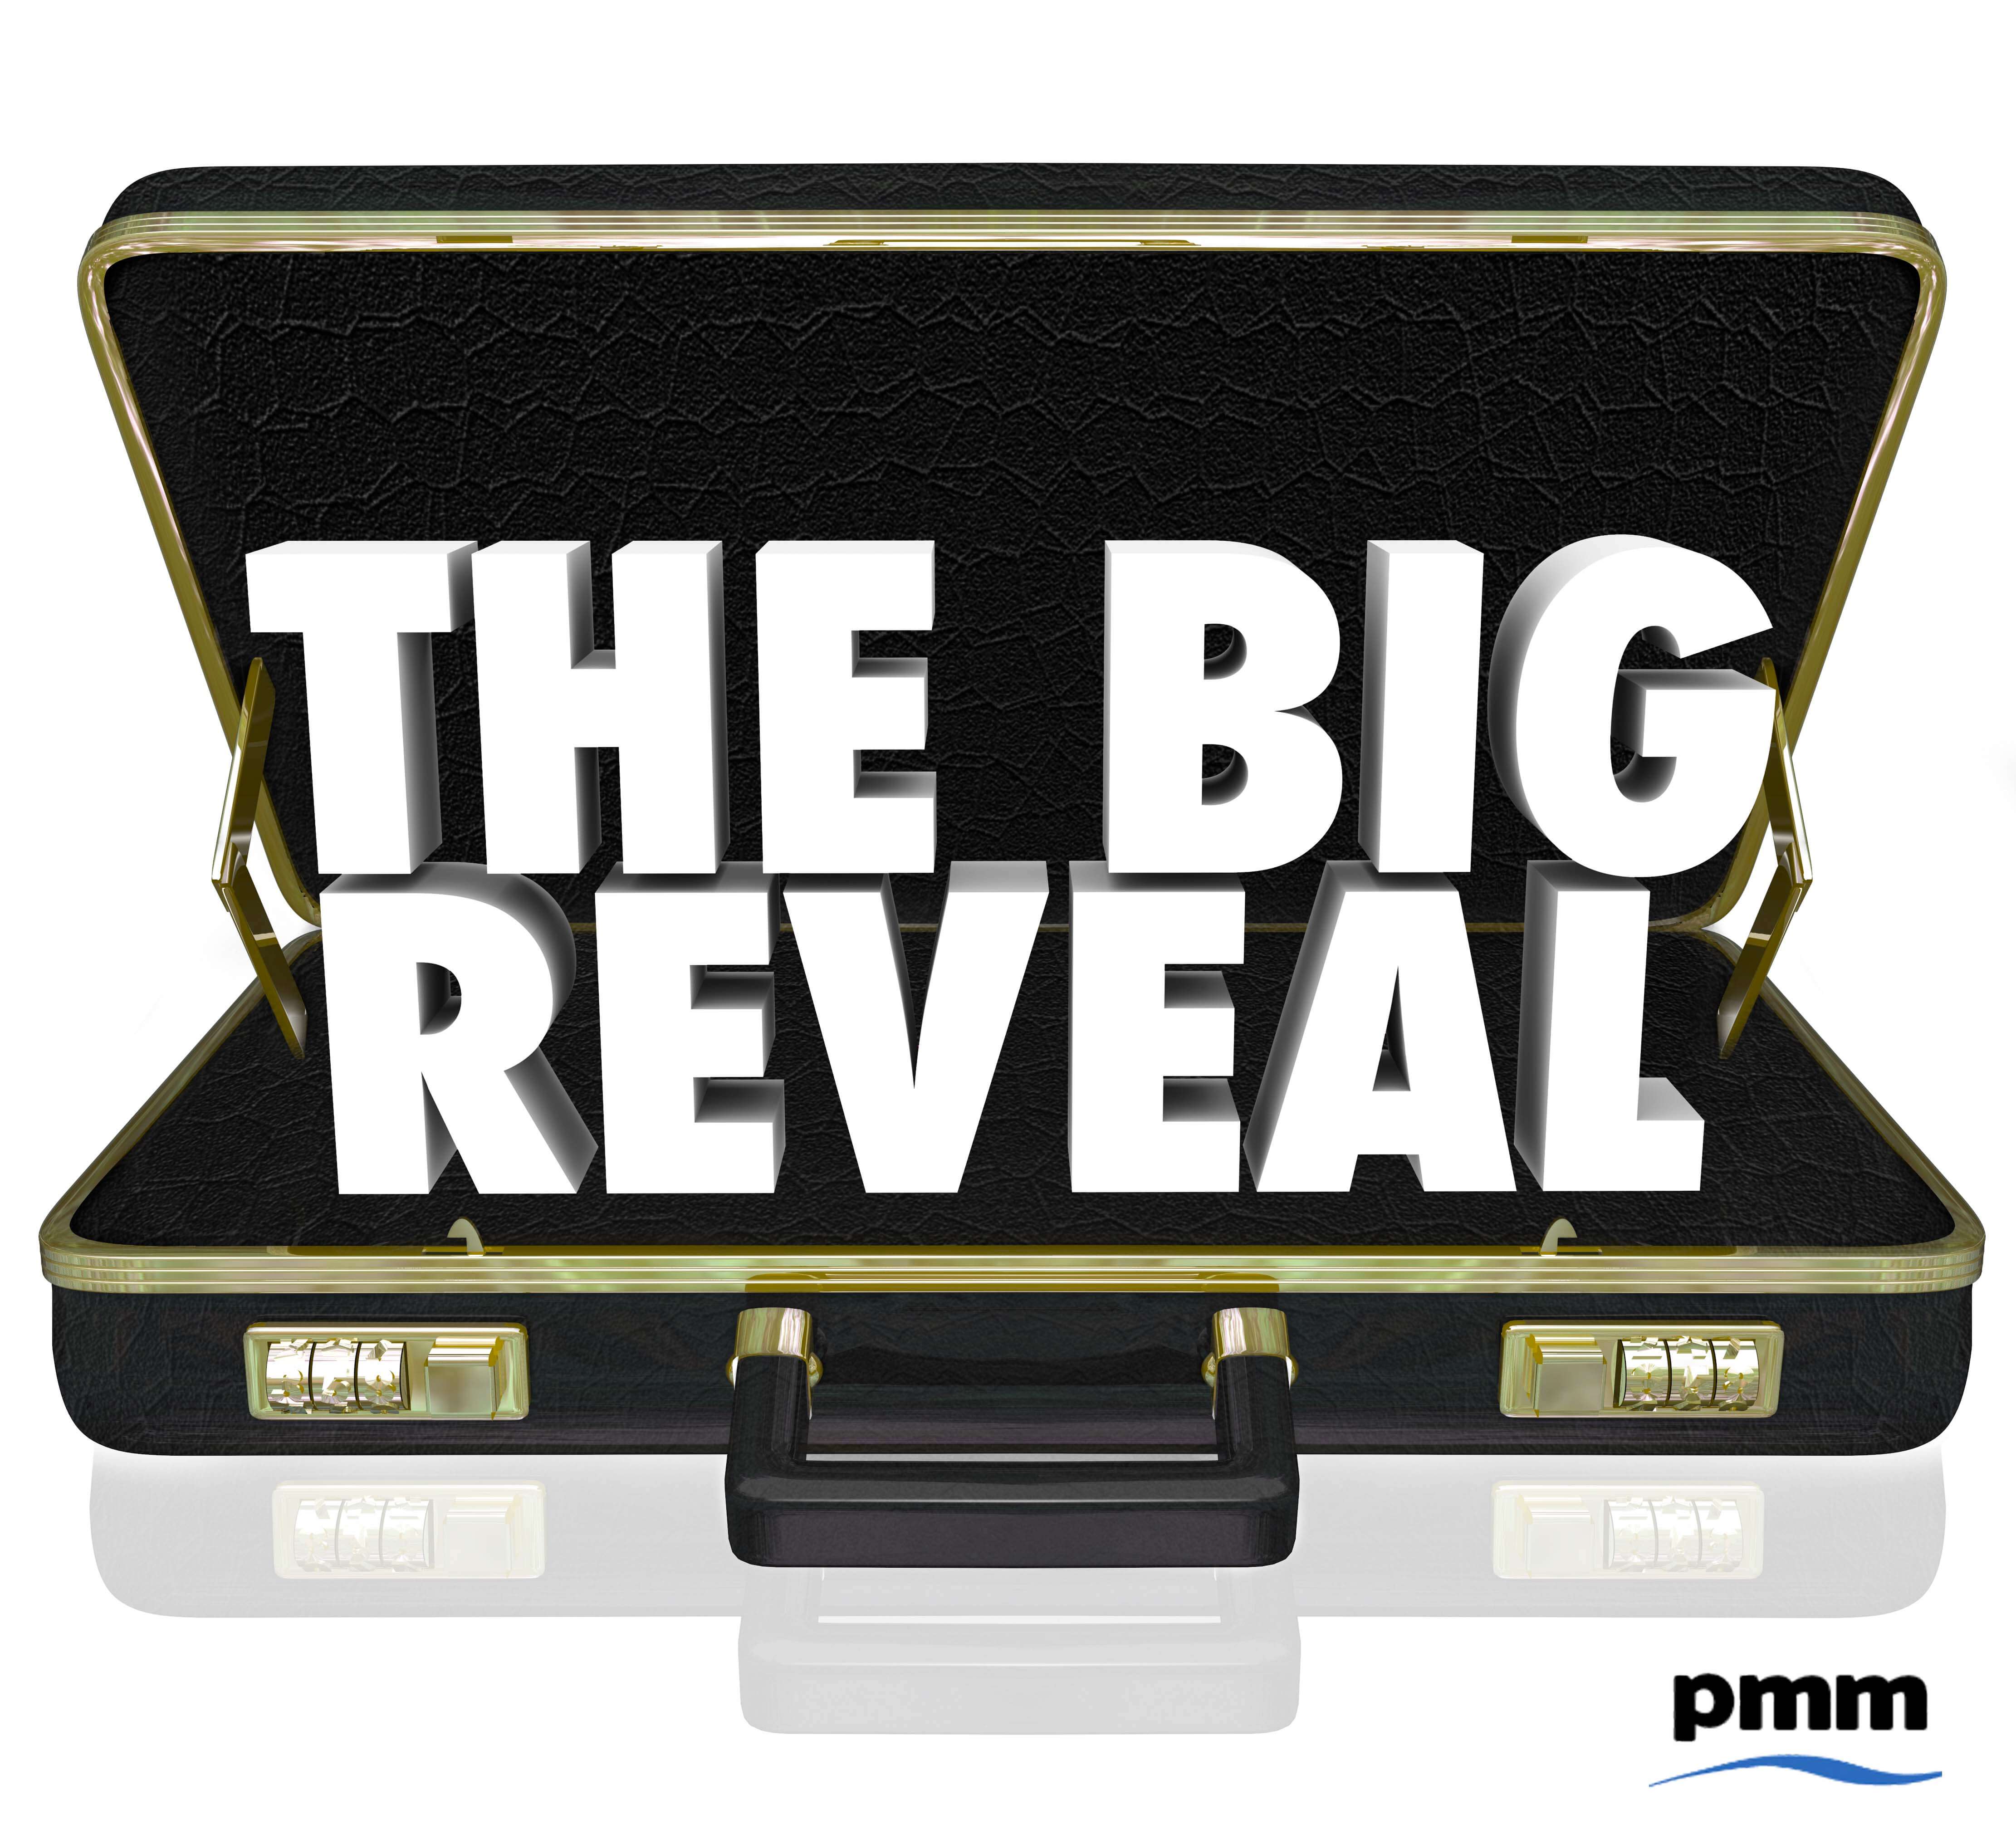 Open suit case with text "the big reveal"